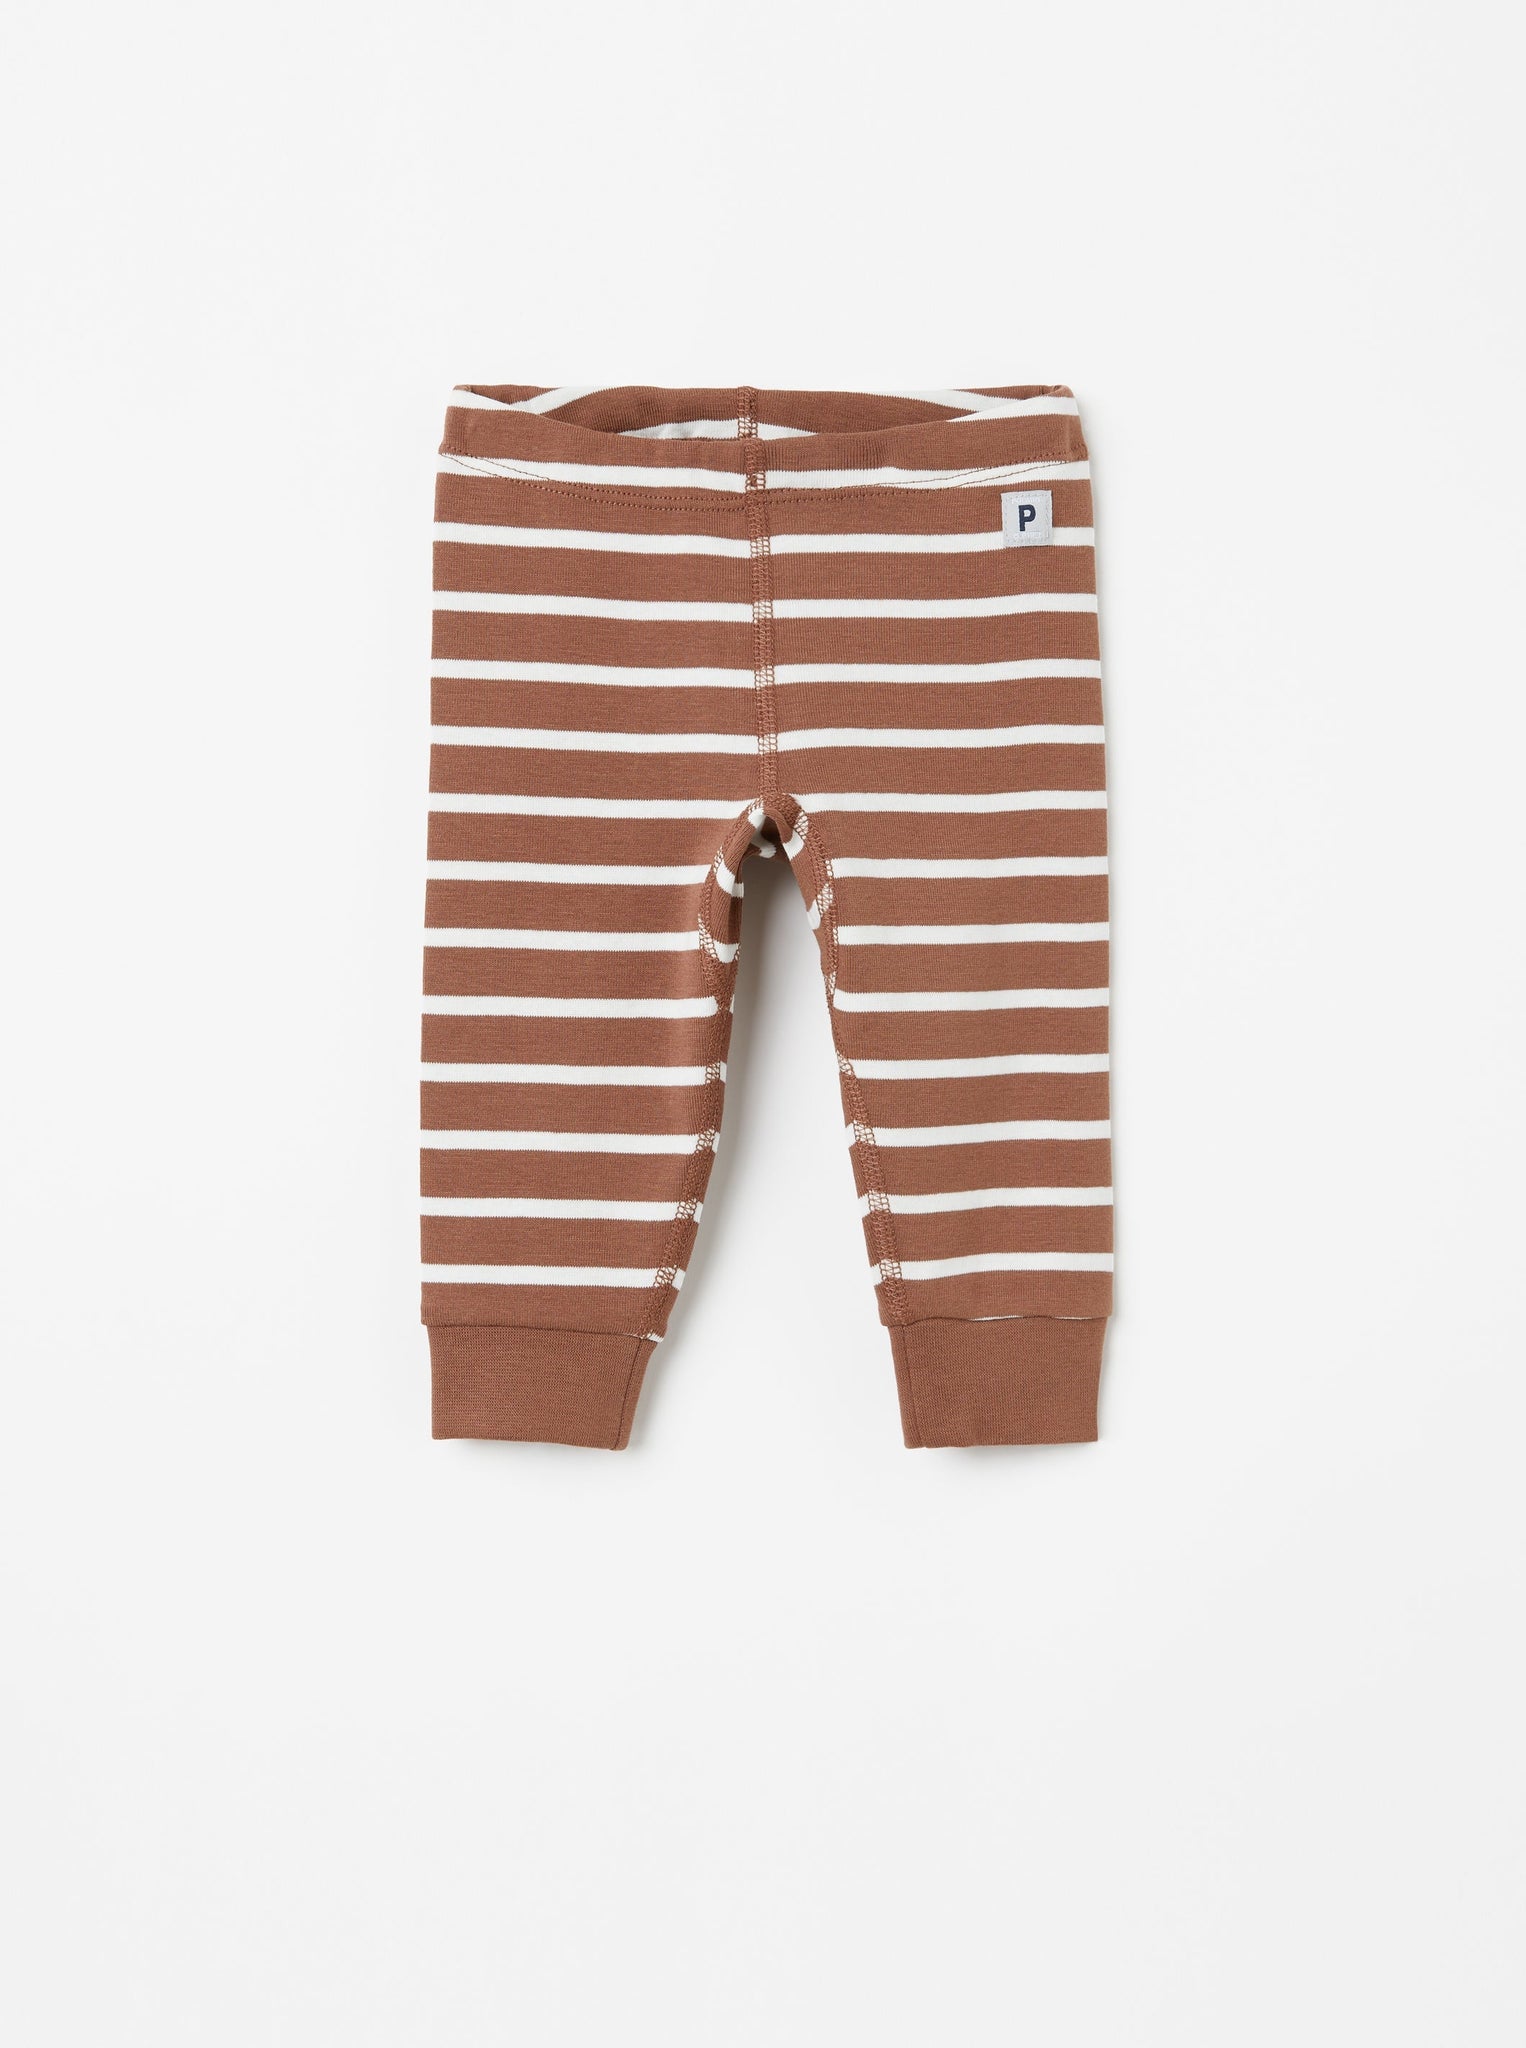 Organic Cotton Brown Baby Leggings from the Polarn O. Pyret Kidswear collection. Clothes made using sustainably sourced materials.